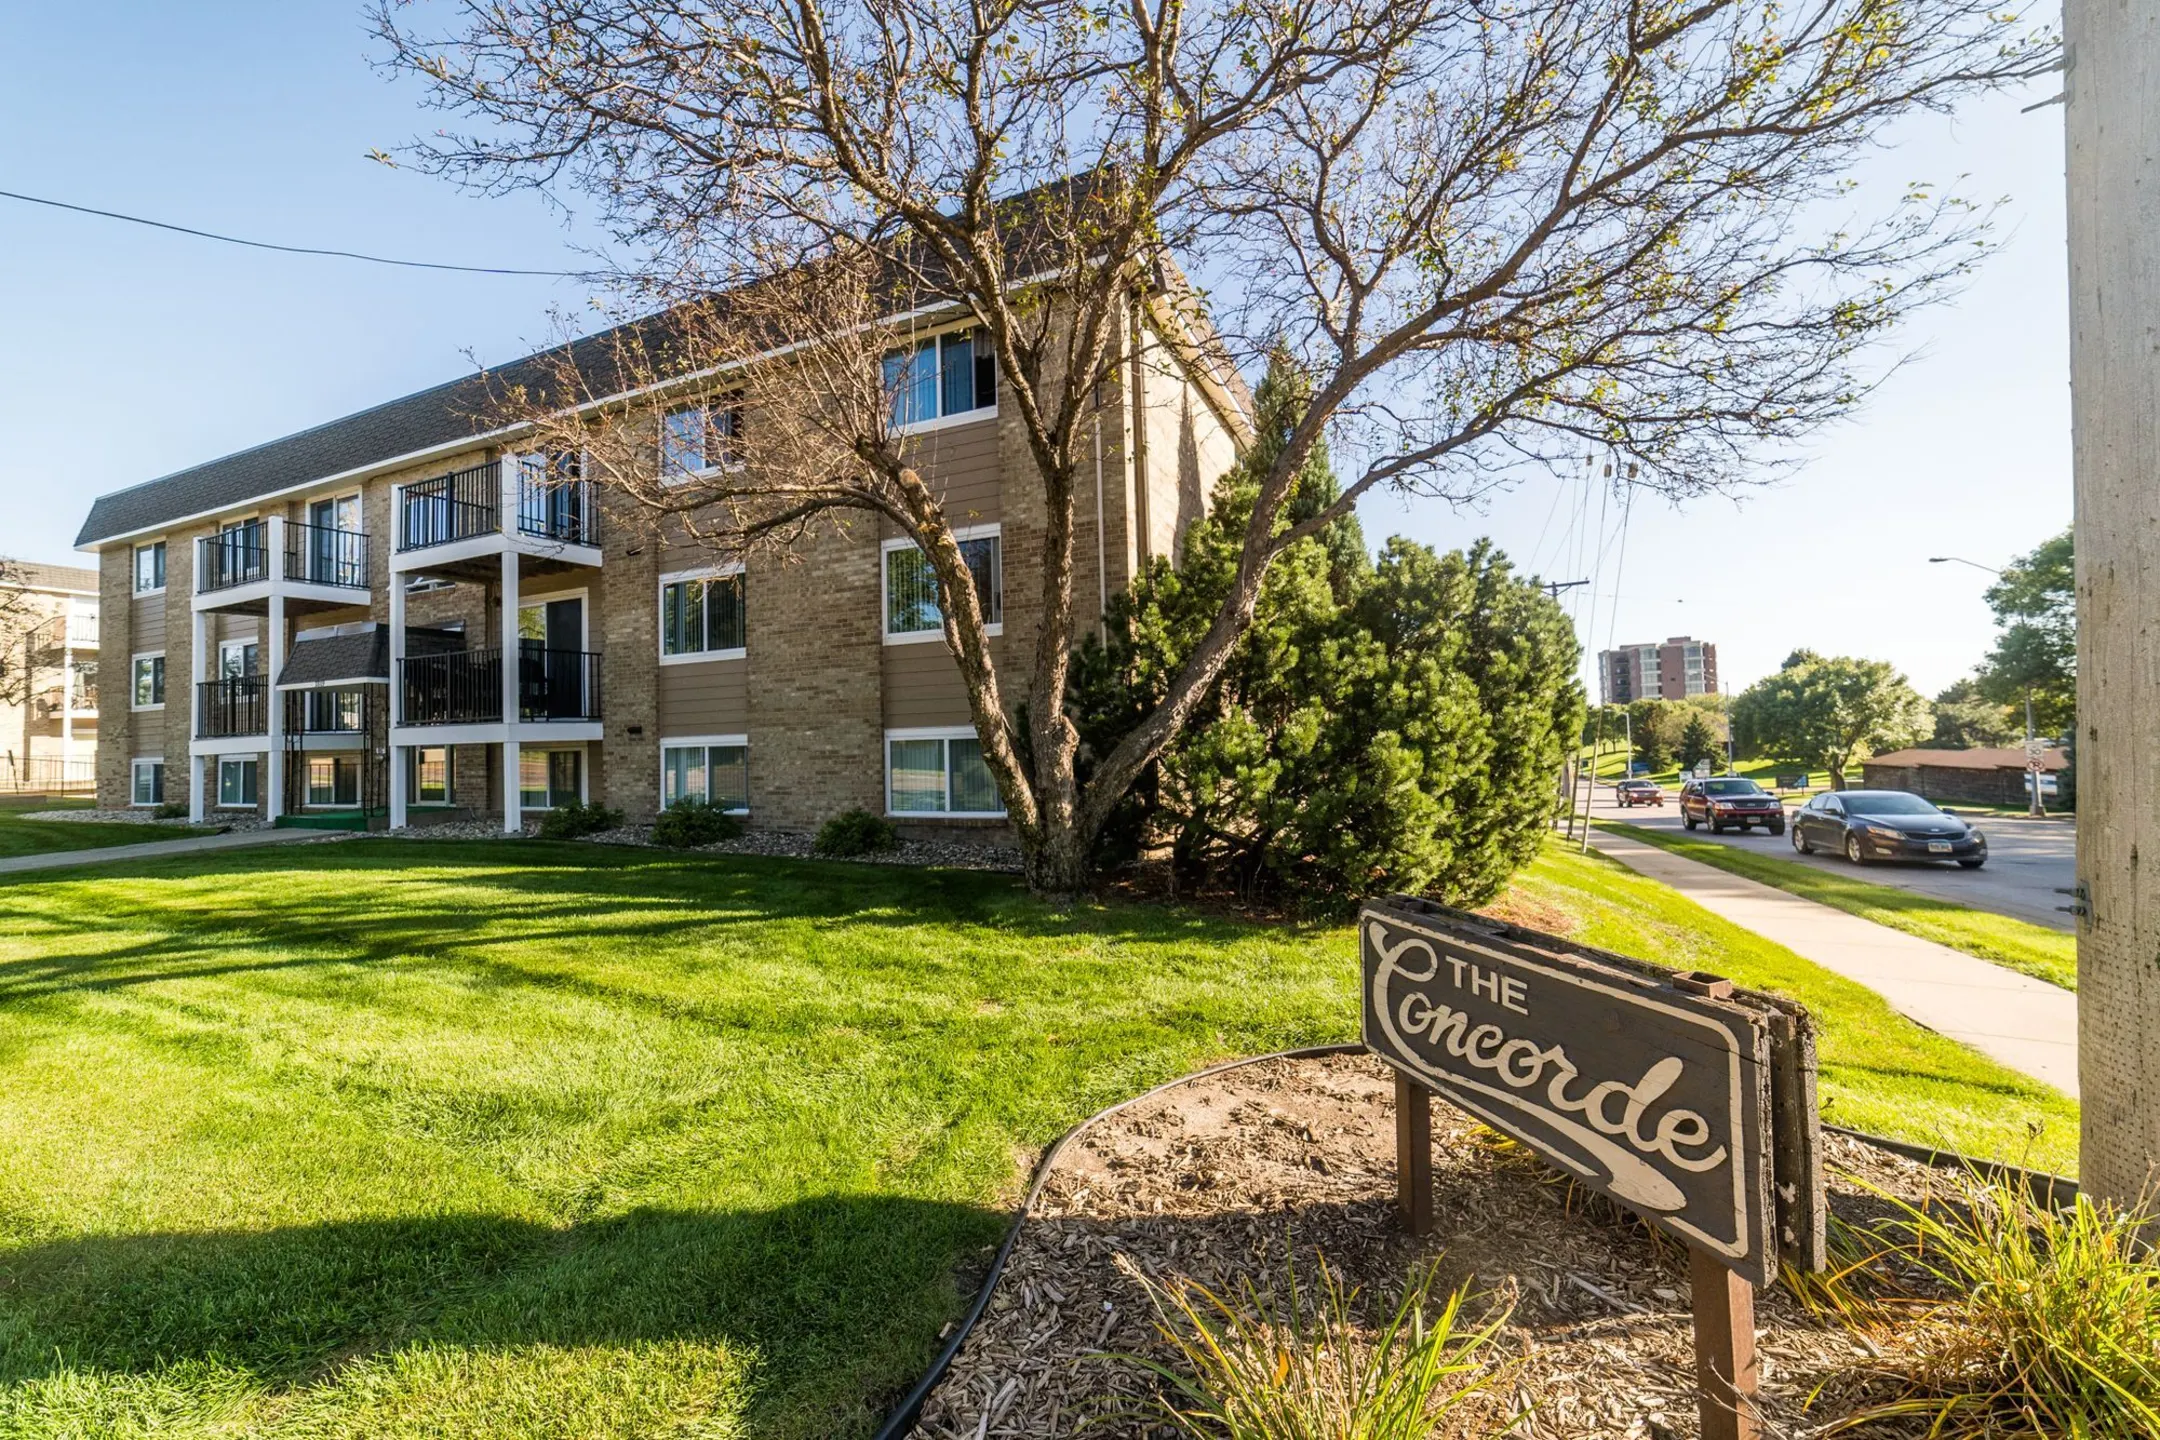 Building - The Concorde Apartments - Sioux Falls, SD